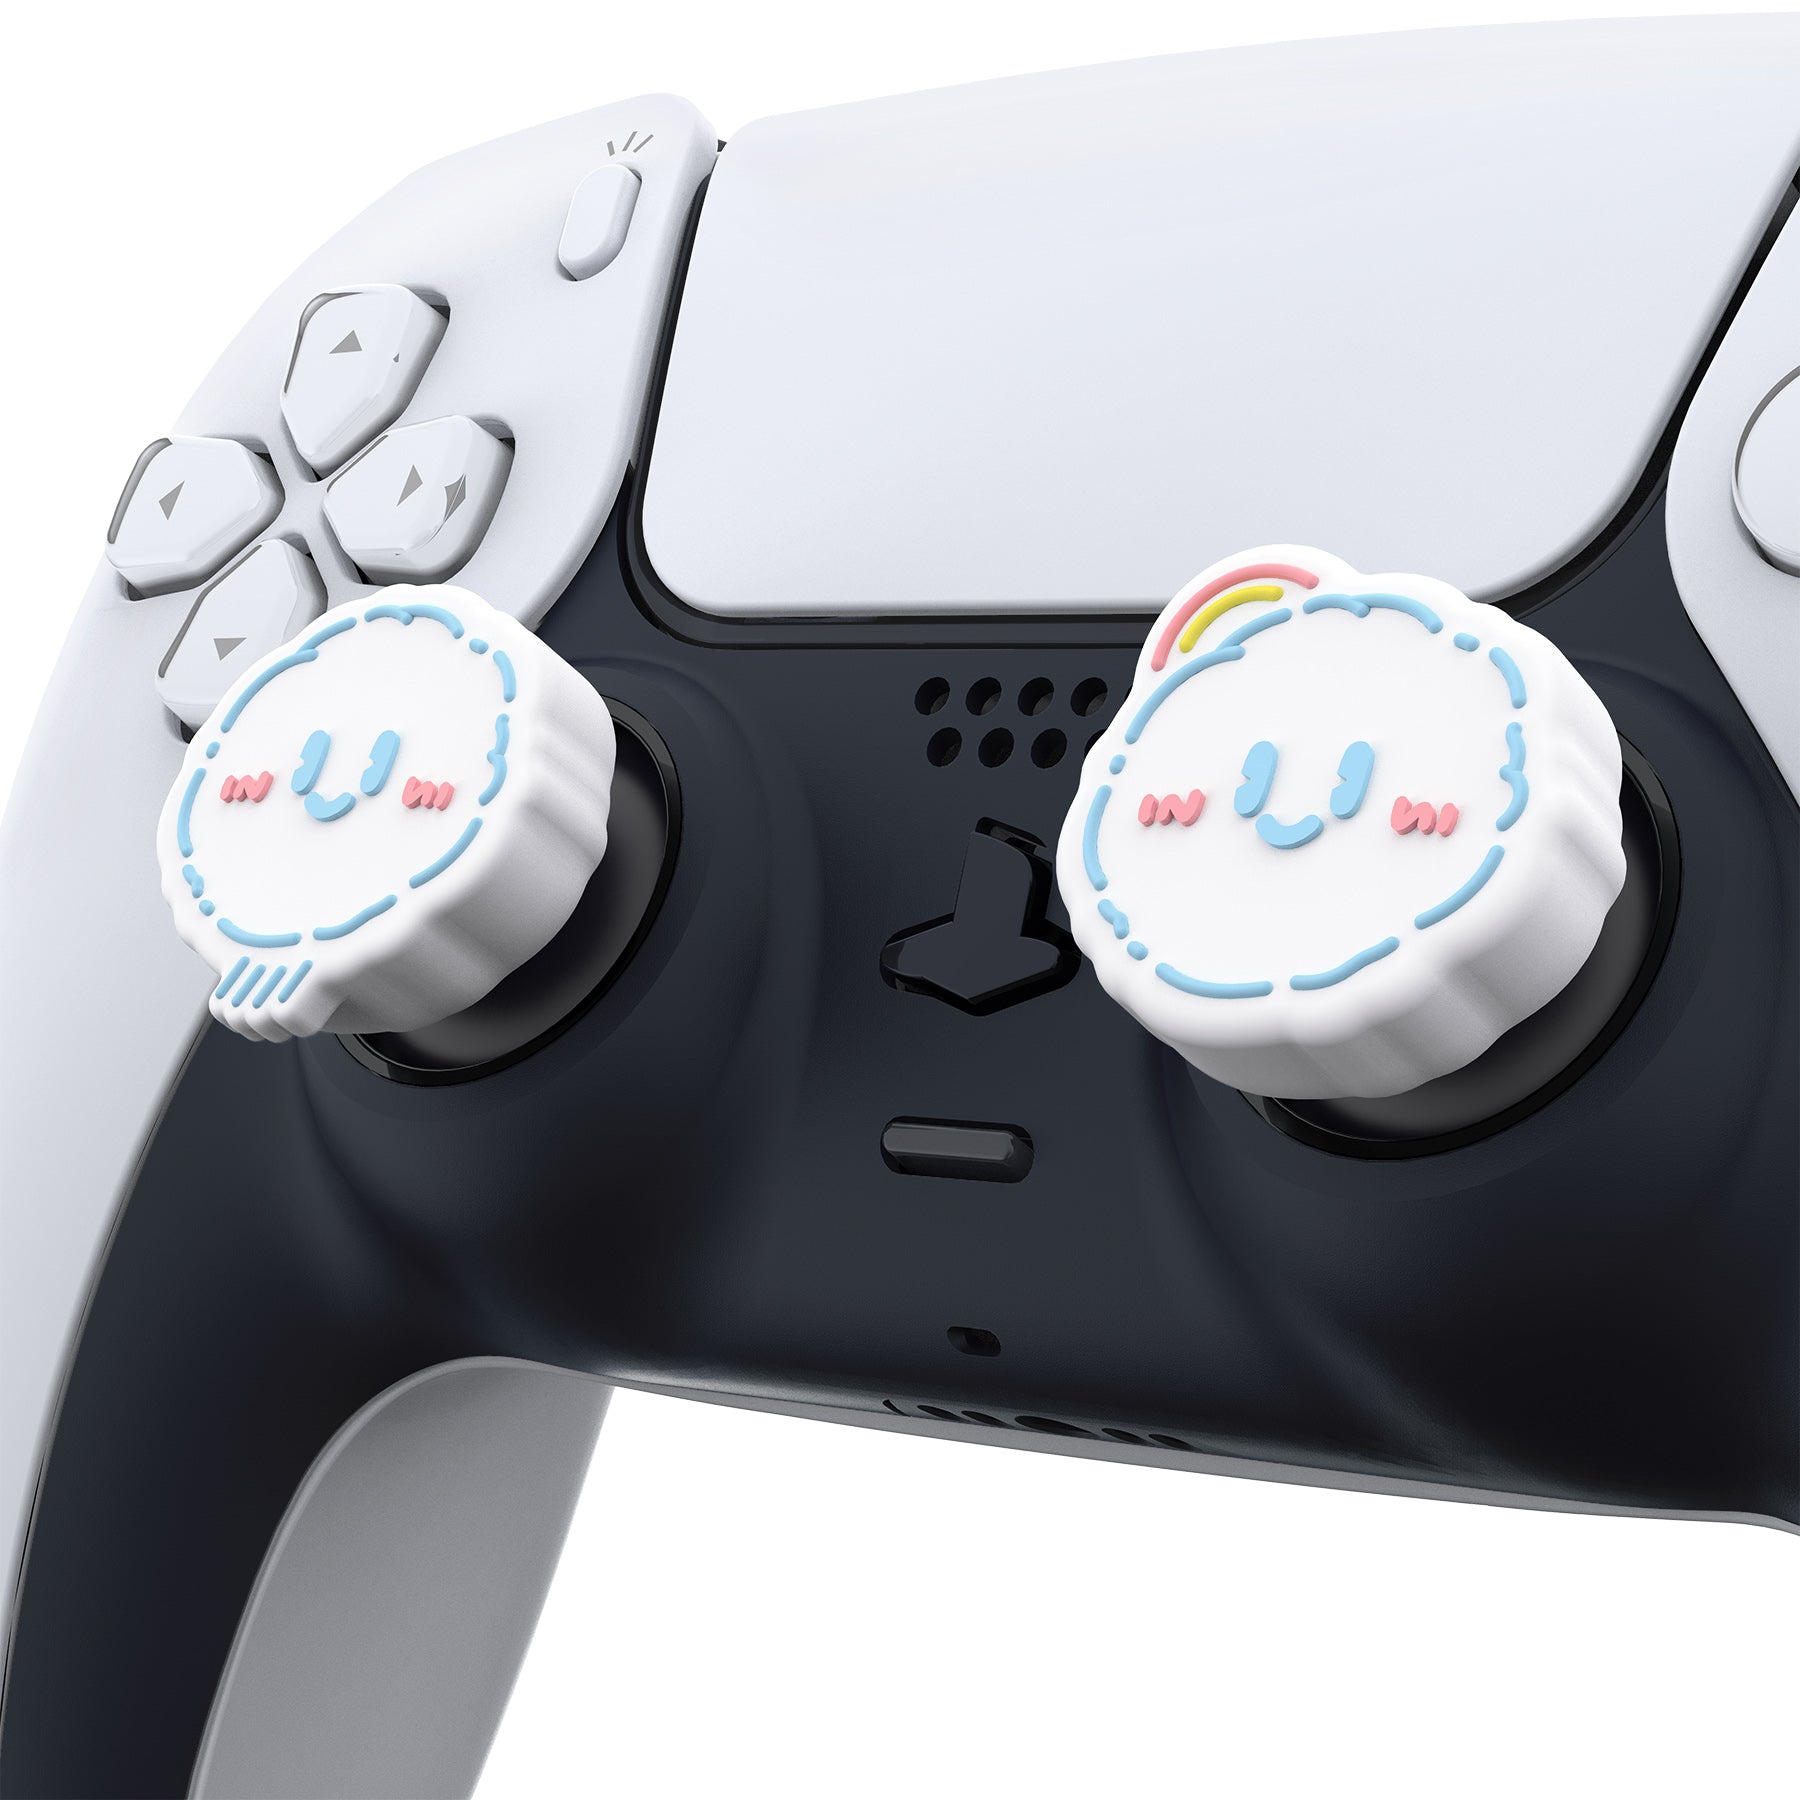 PlayVital Cute Thumb Grip Caps for PS5/4 Controller, Silicone Analog Stick Caps Cover for Xbox Series X/S, Thumbstick Caps for Switch Pro Controller - Rainbow Clouds & Rainy Clouds - PJM3014 PlayVital